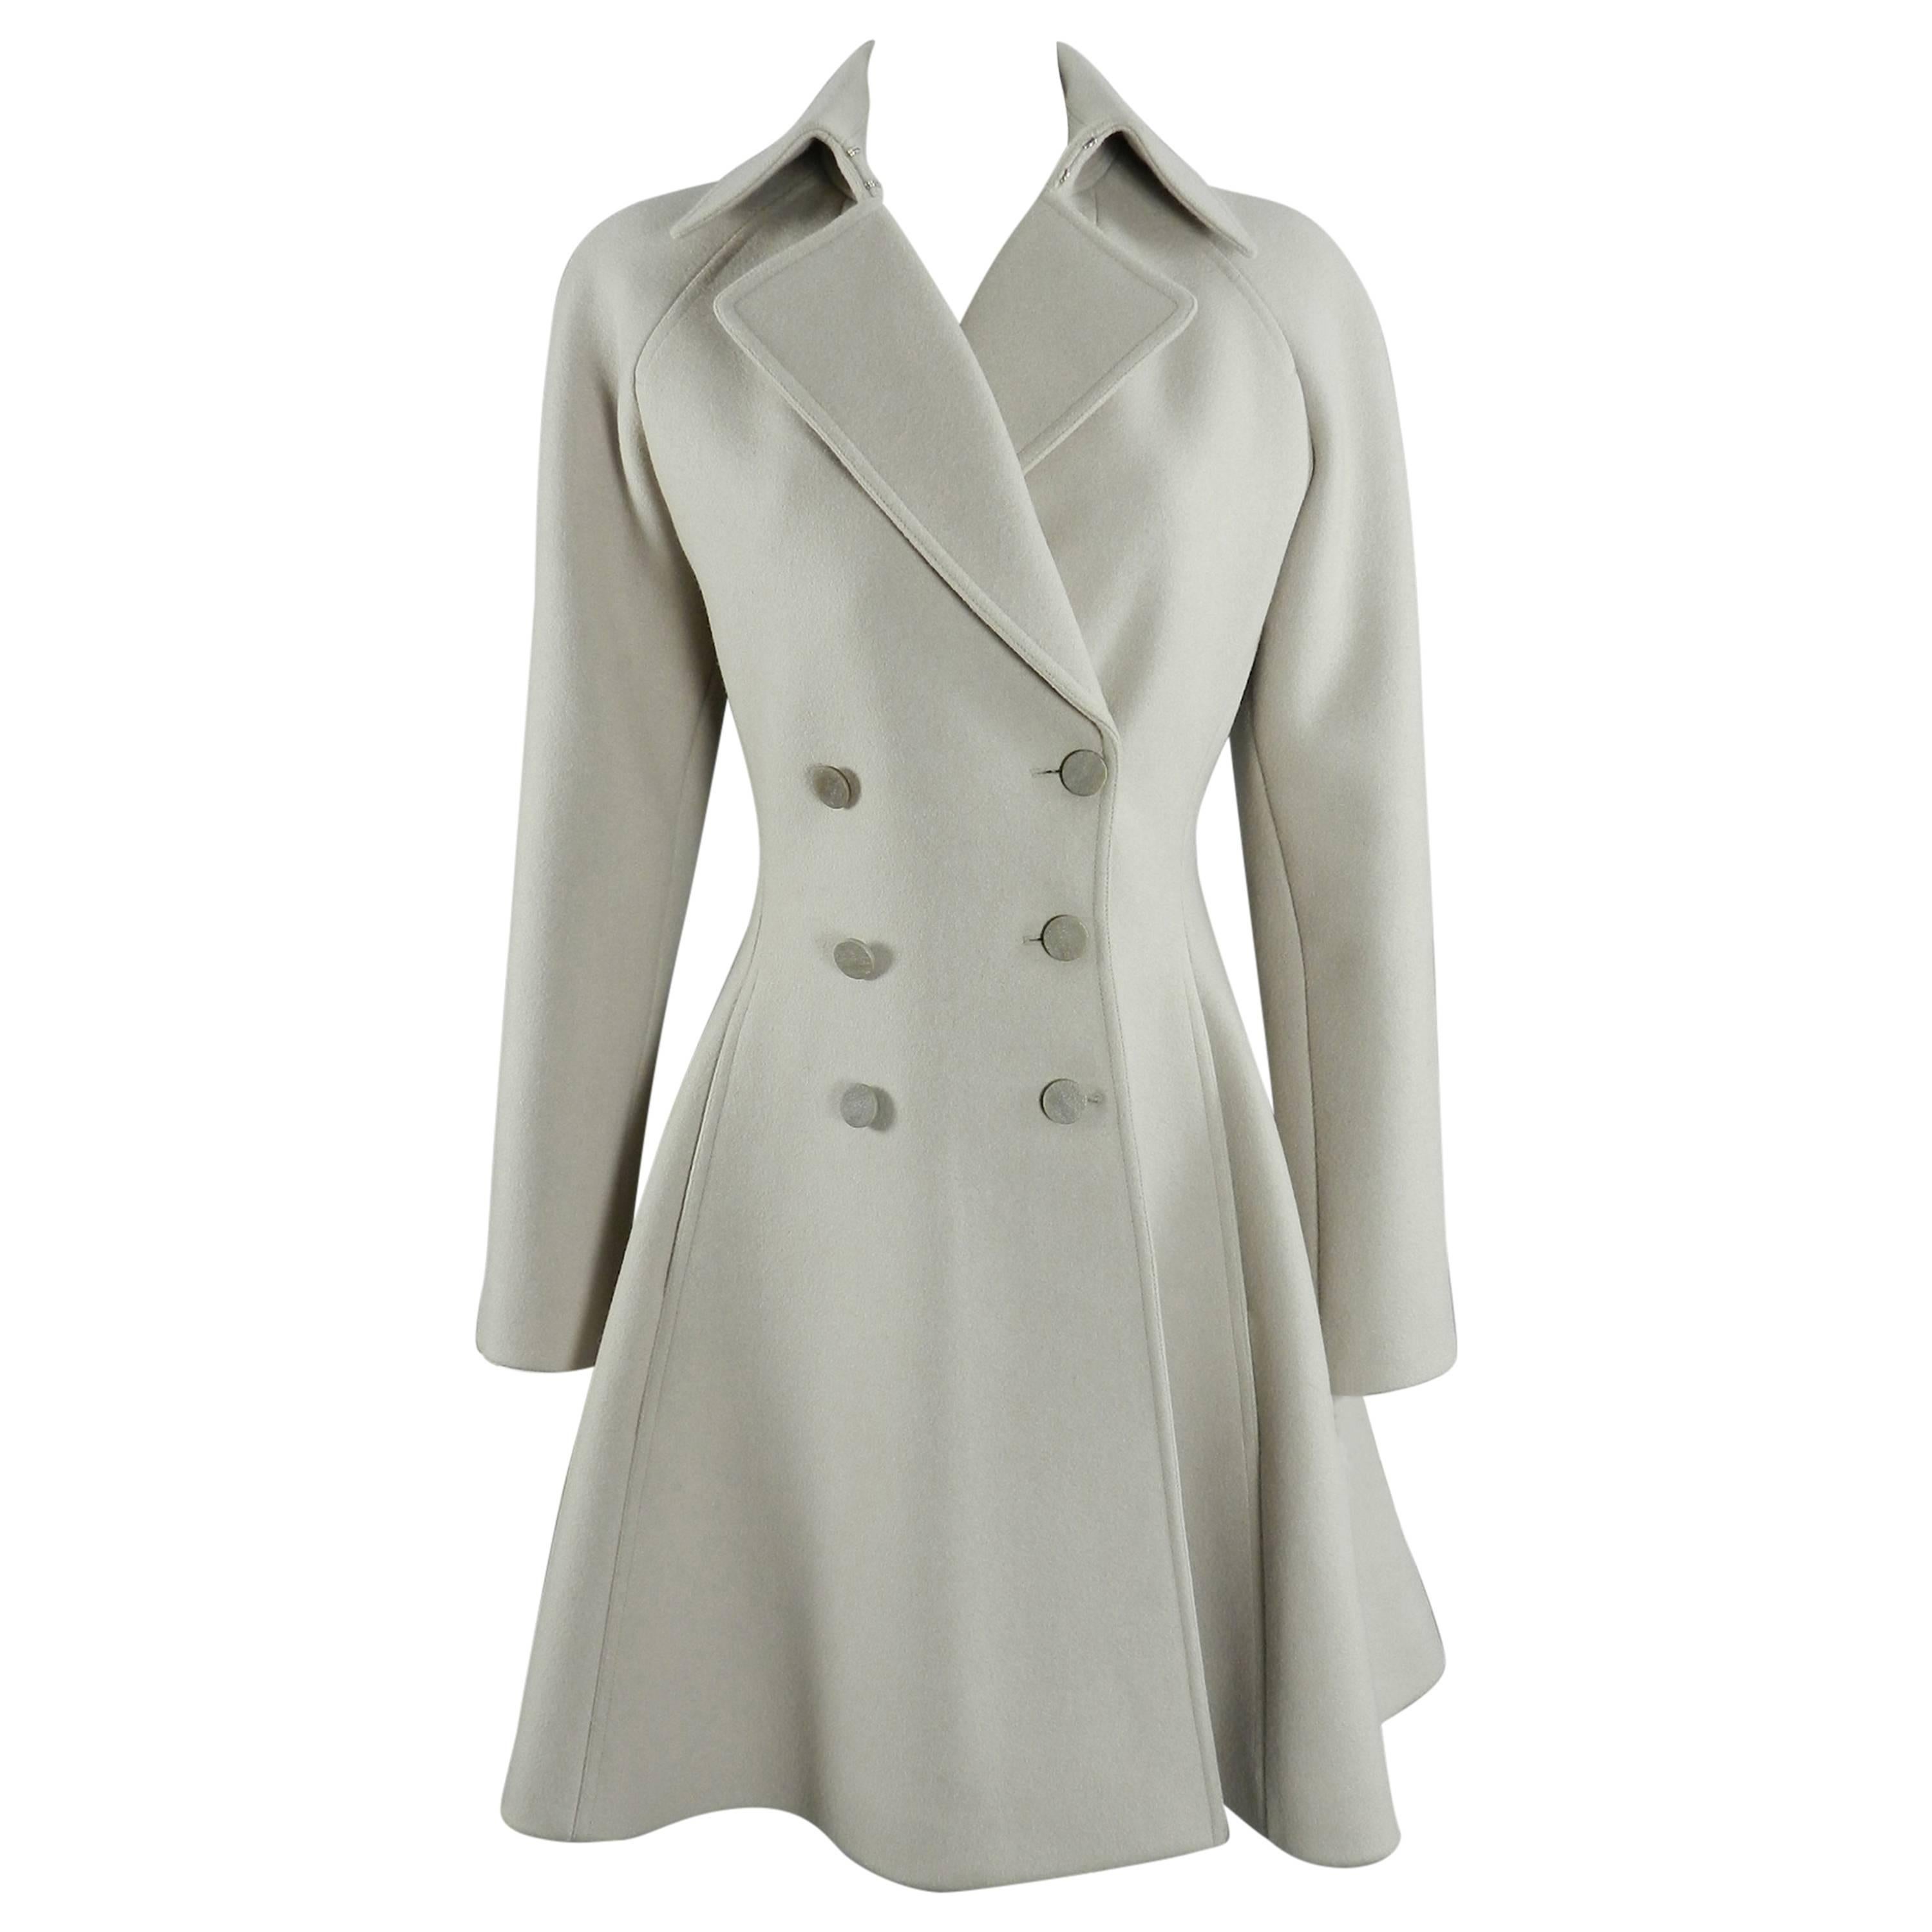 Alaia Dove Grey Structured Wool Dress Coat